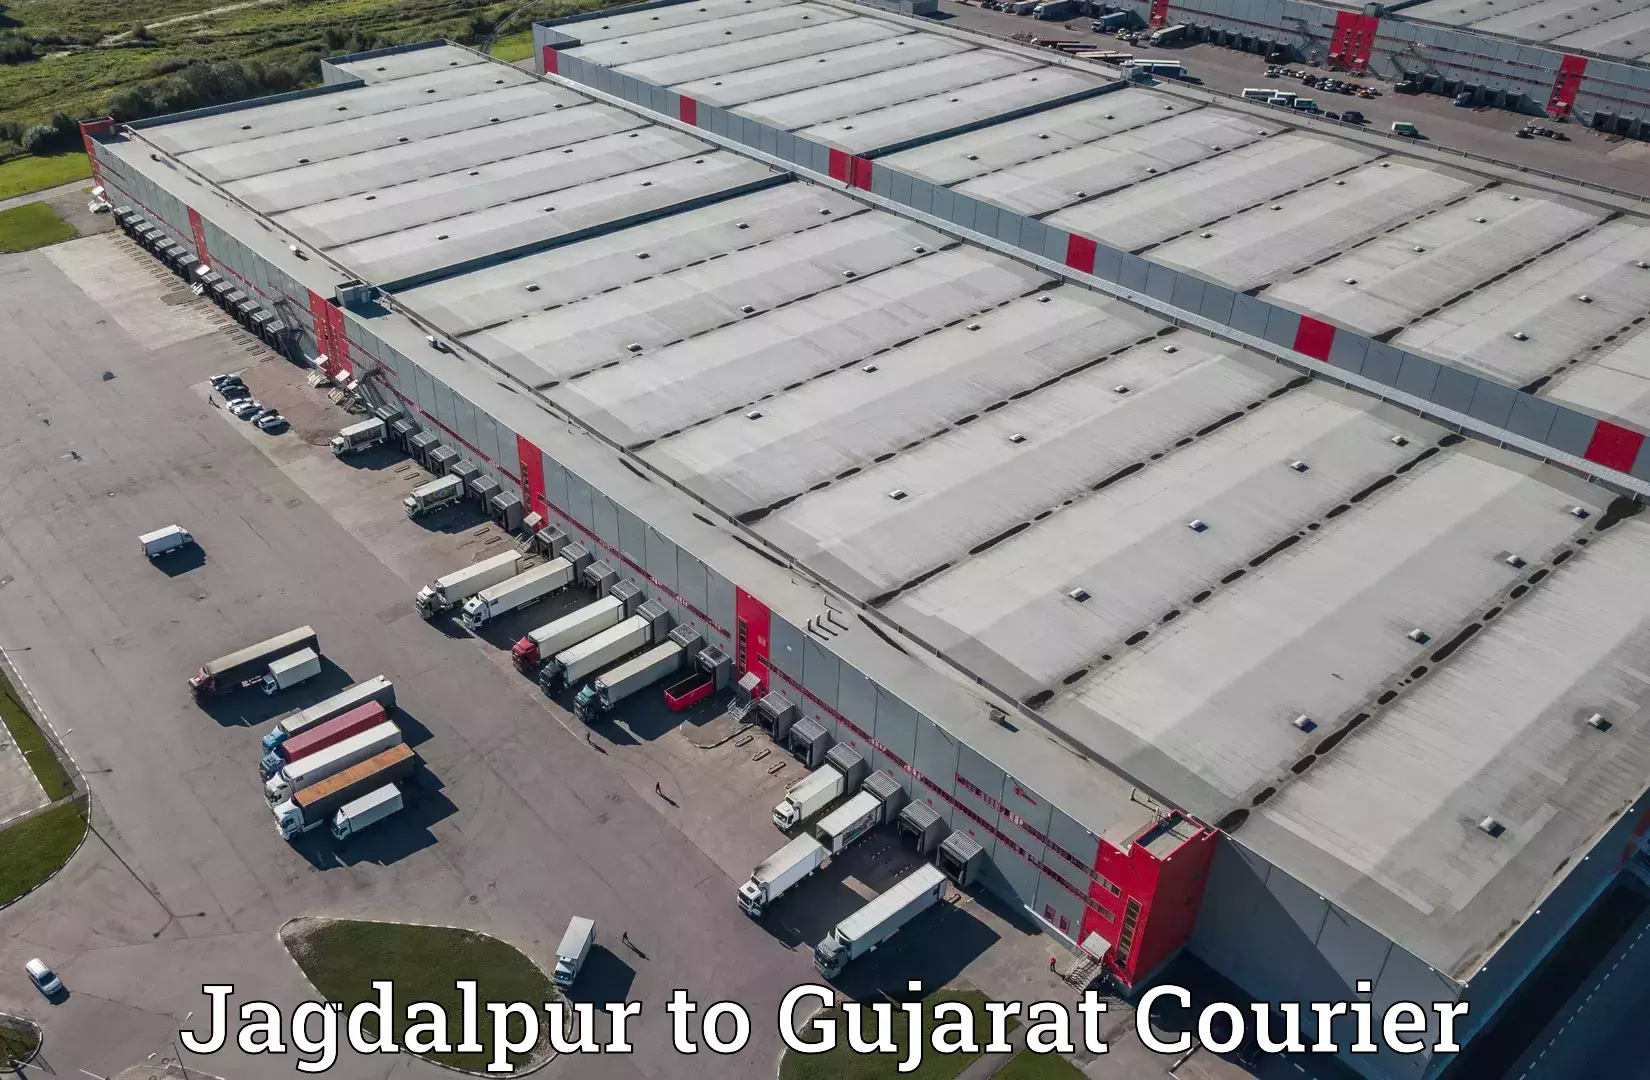 Express courier capabilities Jagdalpur to Ahmedabad